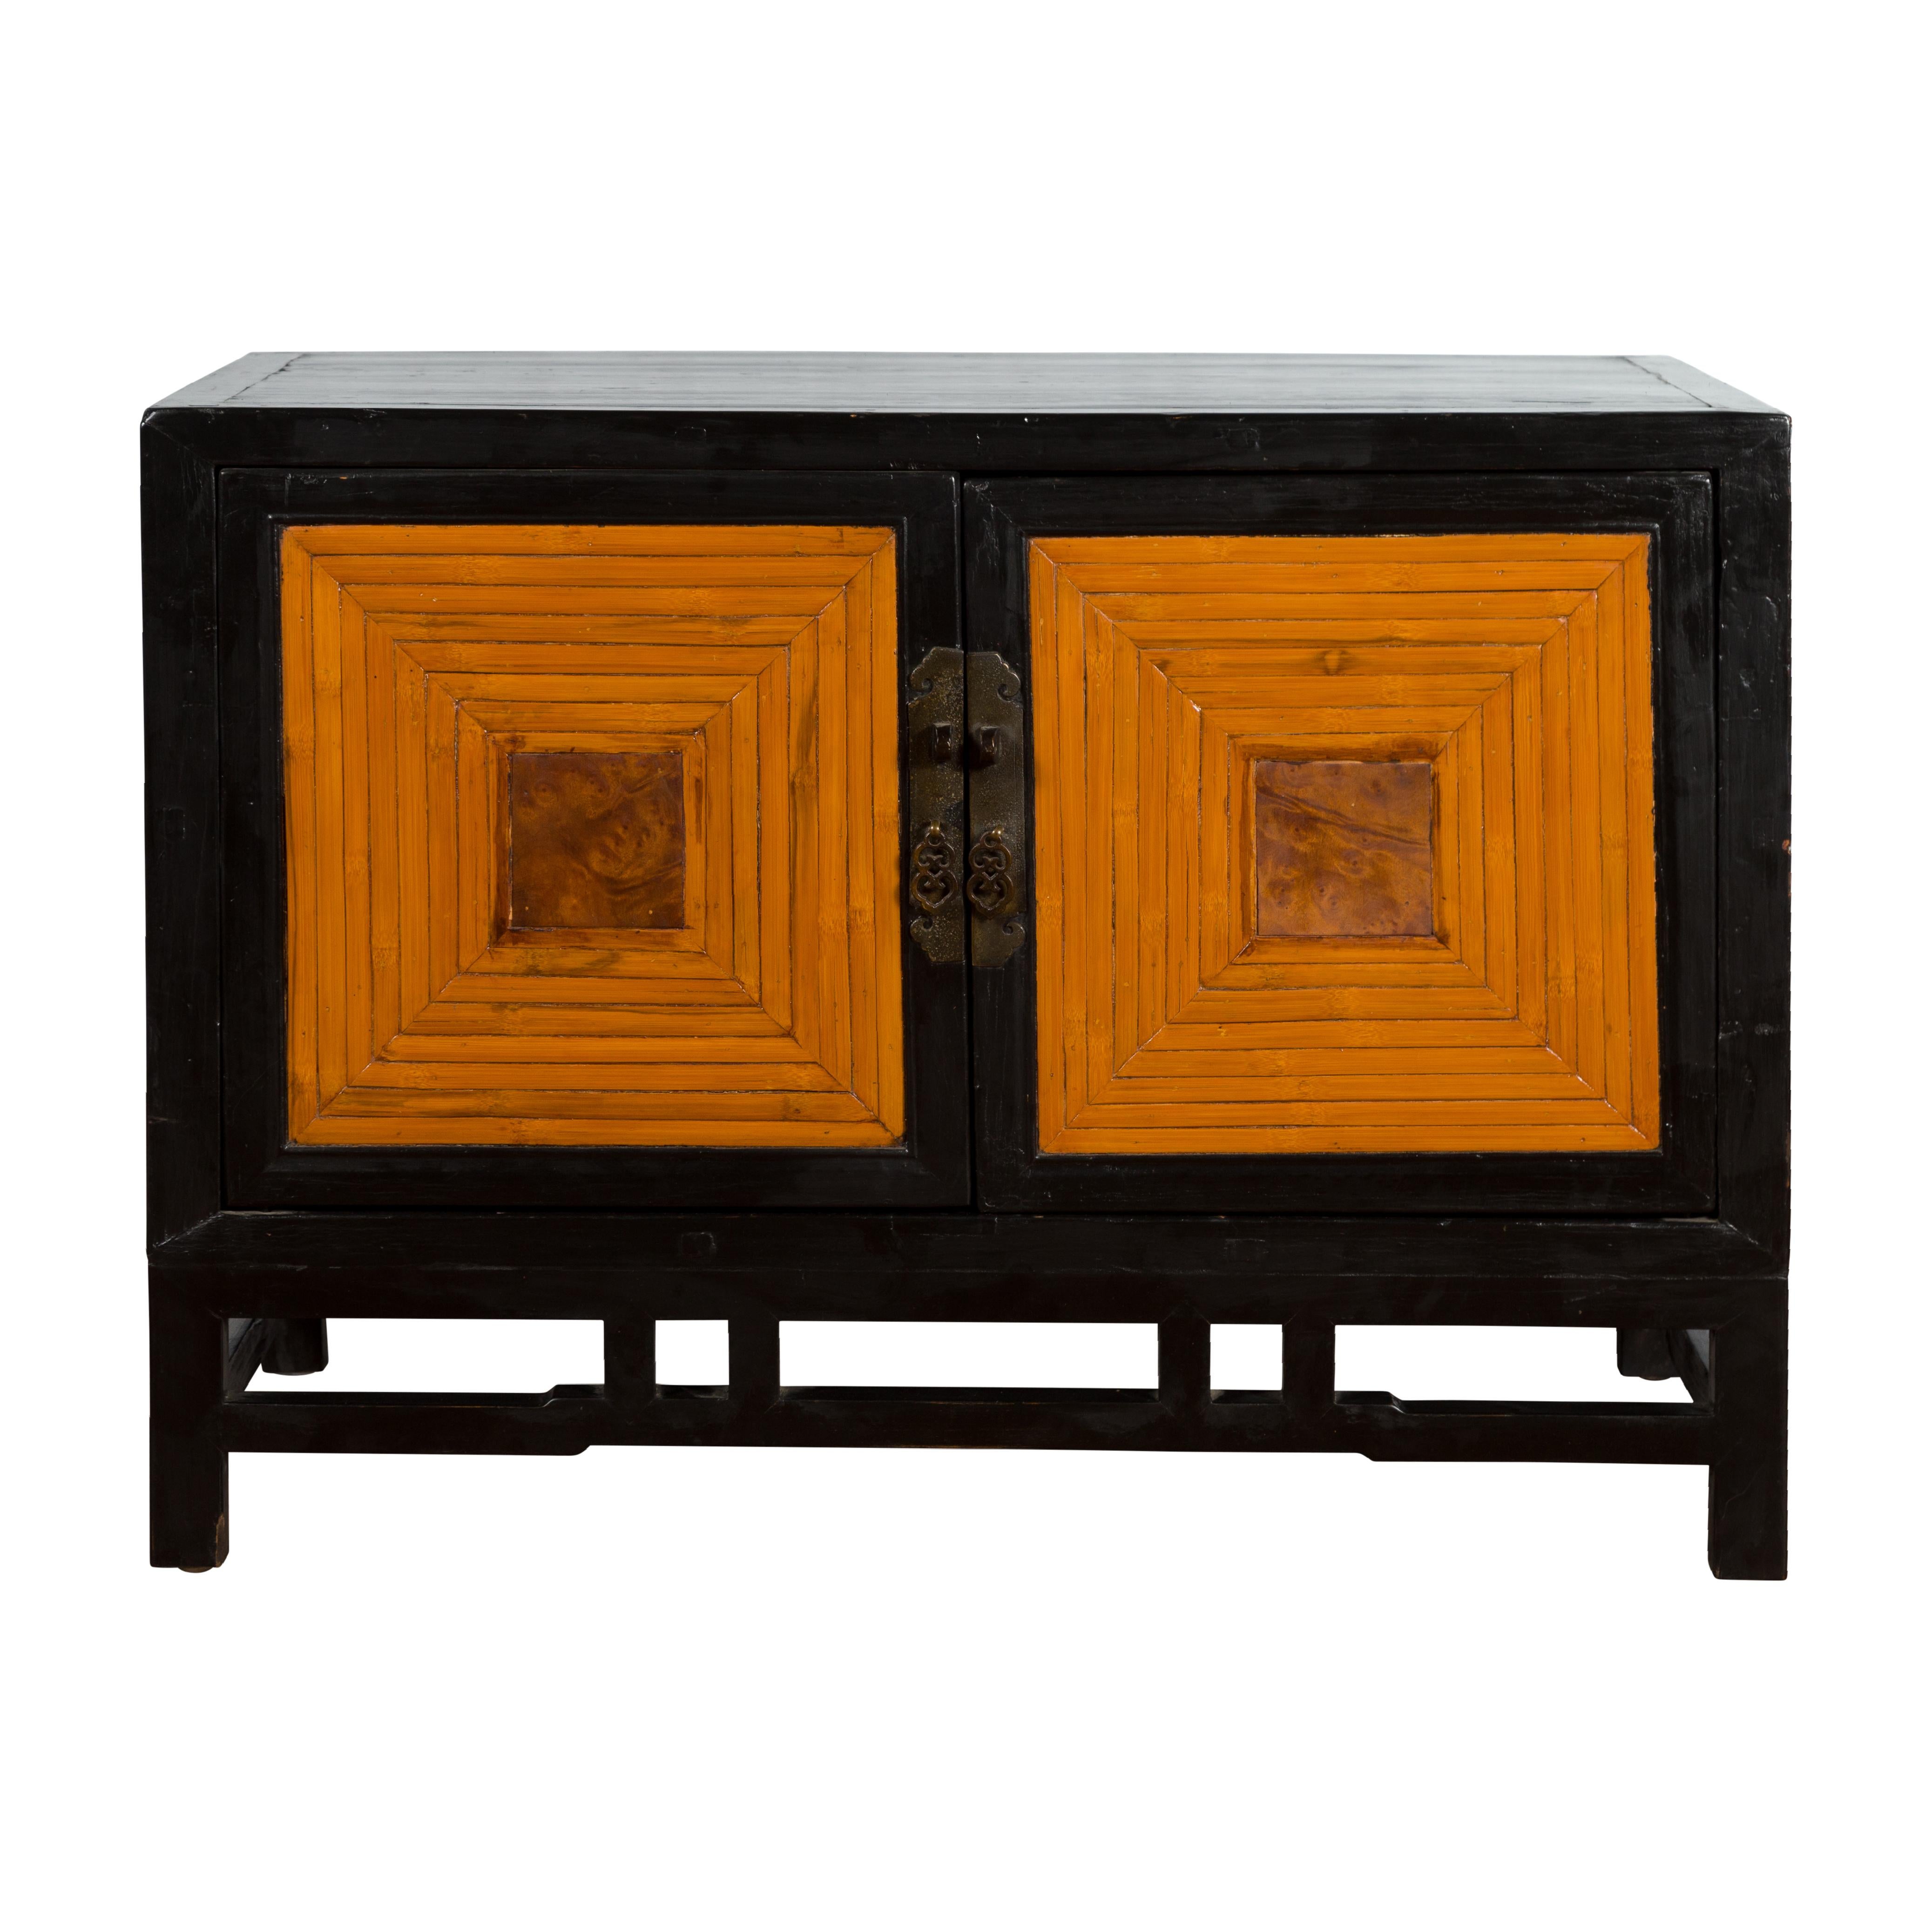 Chinese 1930s Art Deco Black Lacquer Two-Toned Side Cabinet with Bamboo Design For Sale 10